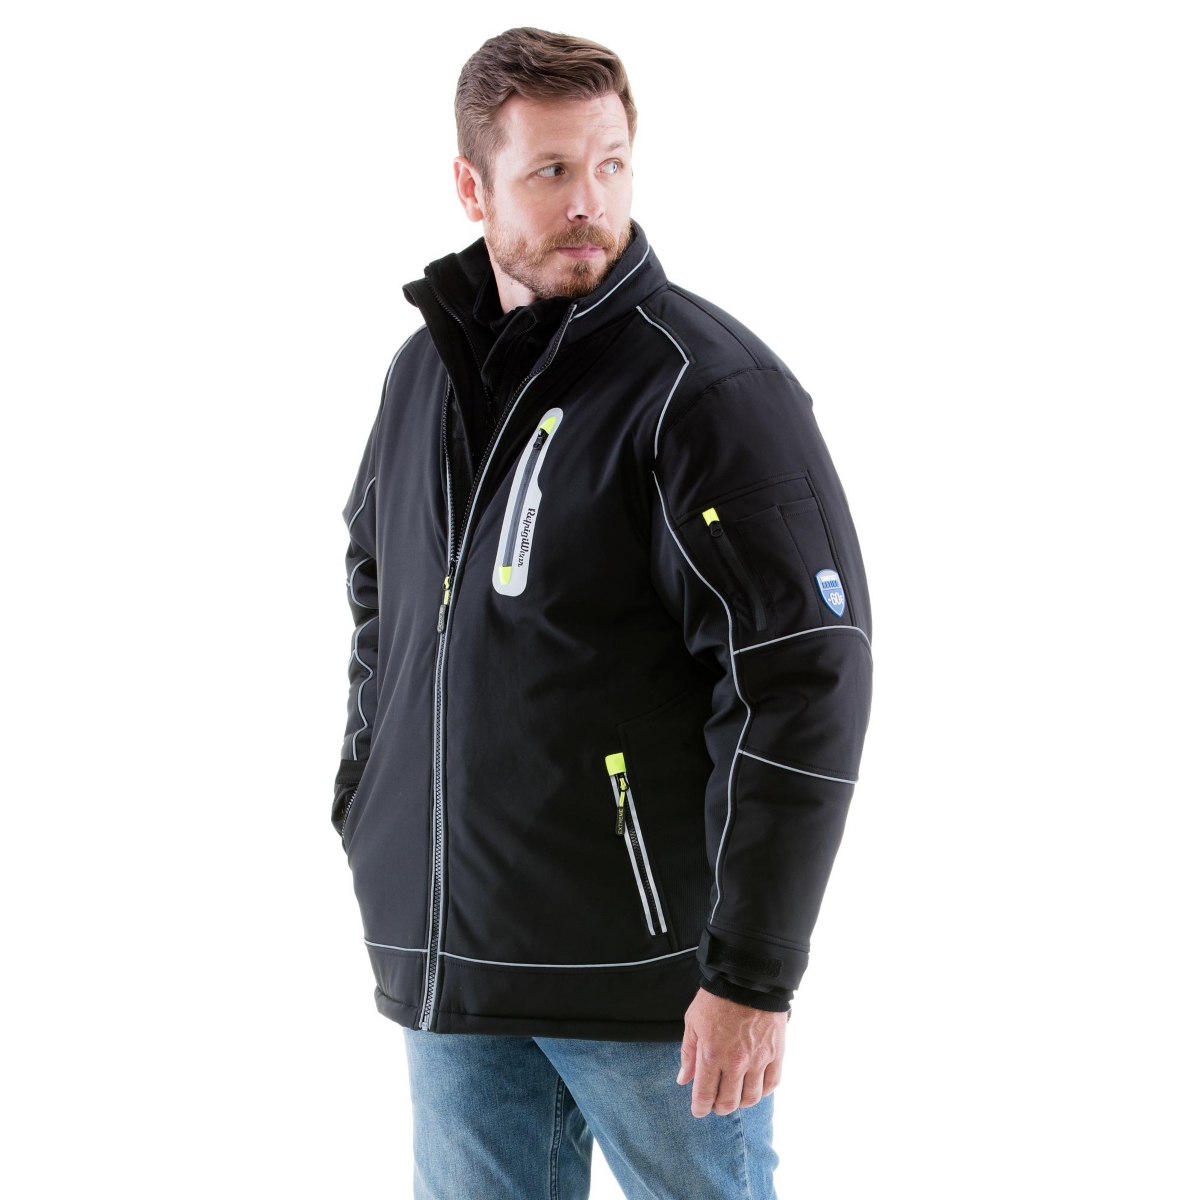 Big & Tall Extreme Weather Softshell Insulated Jacket - Black